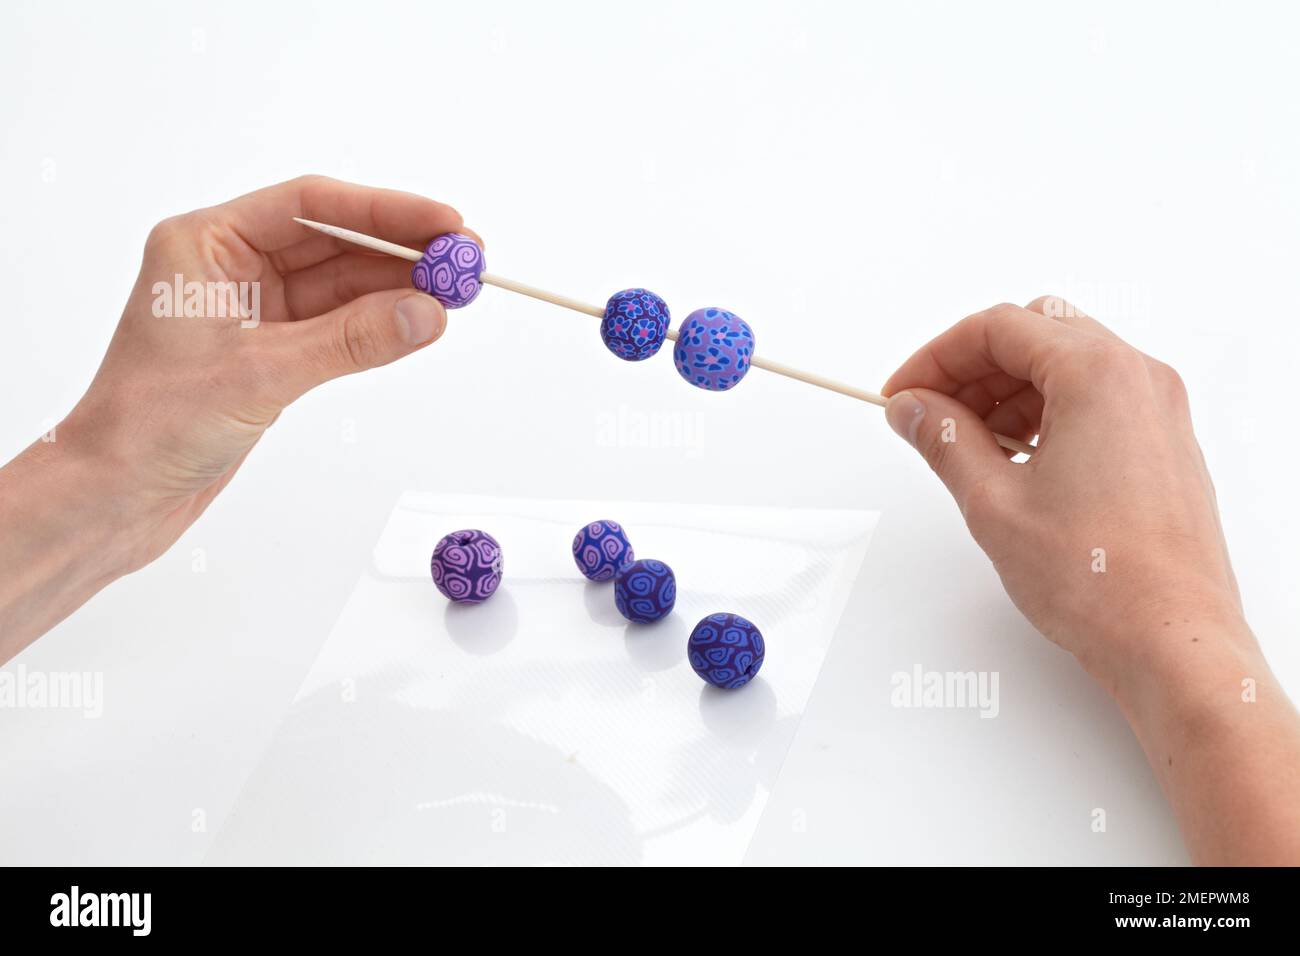 Threading polymer clay beads onto wooden skewer, close-up Stock Photo